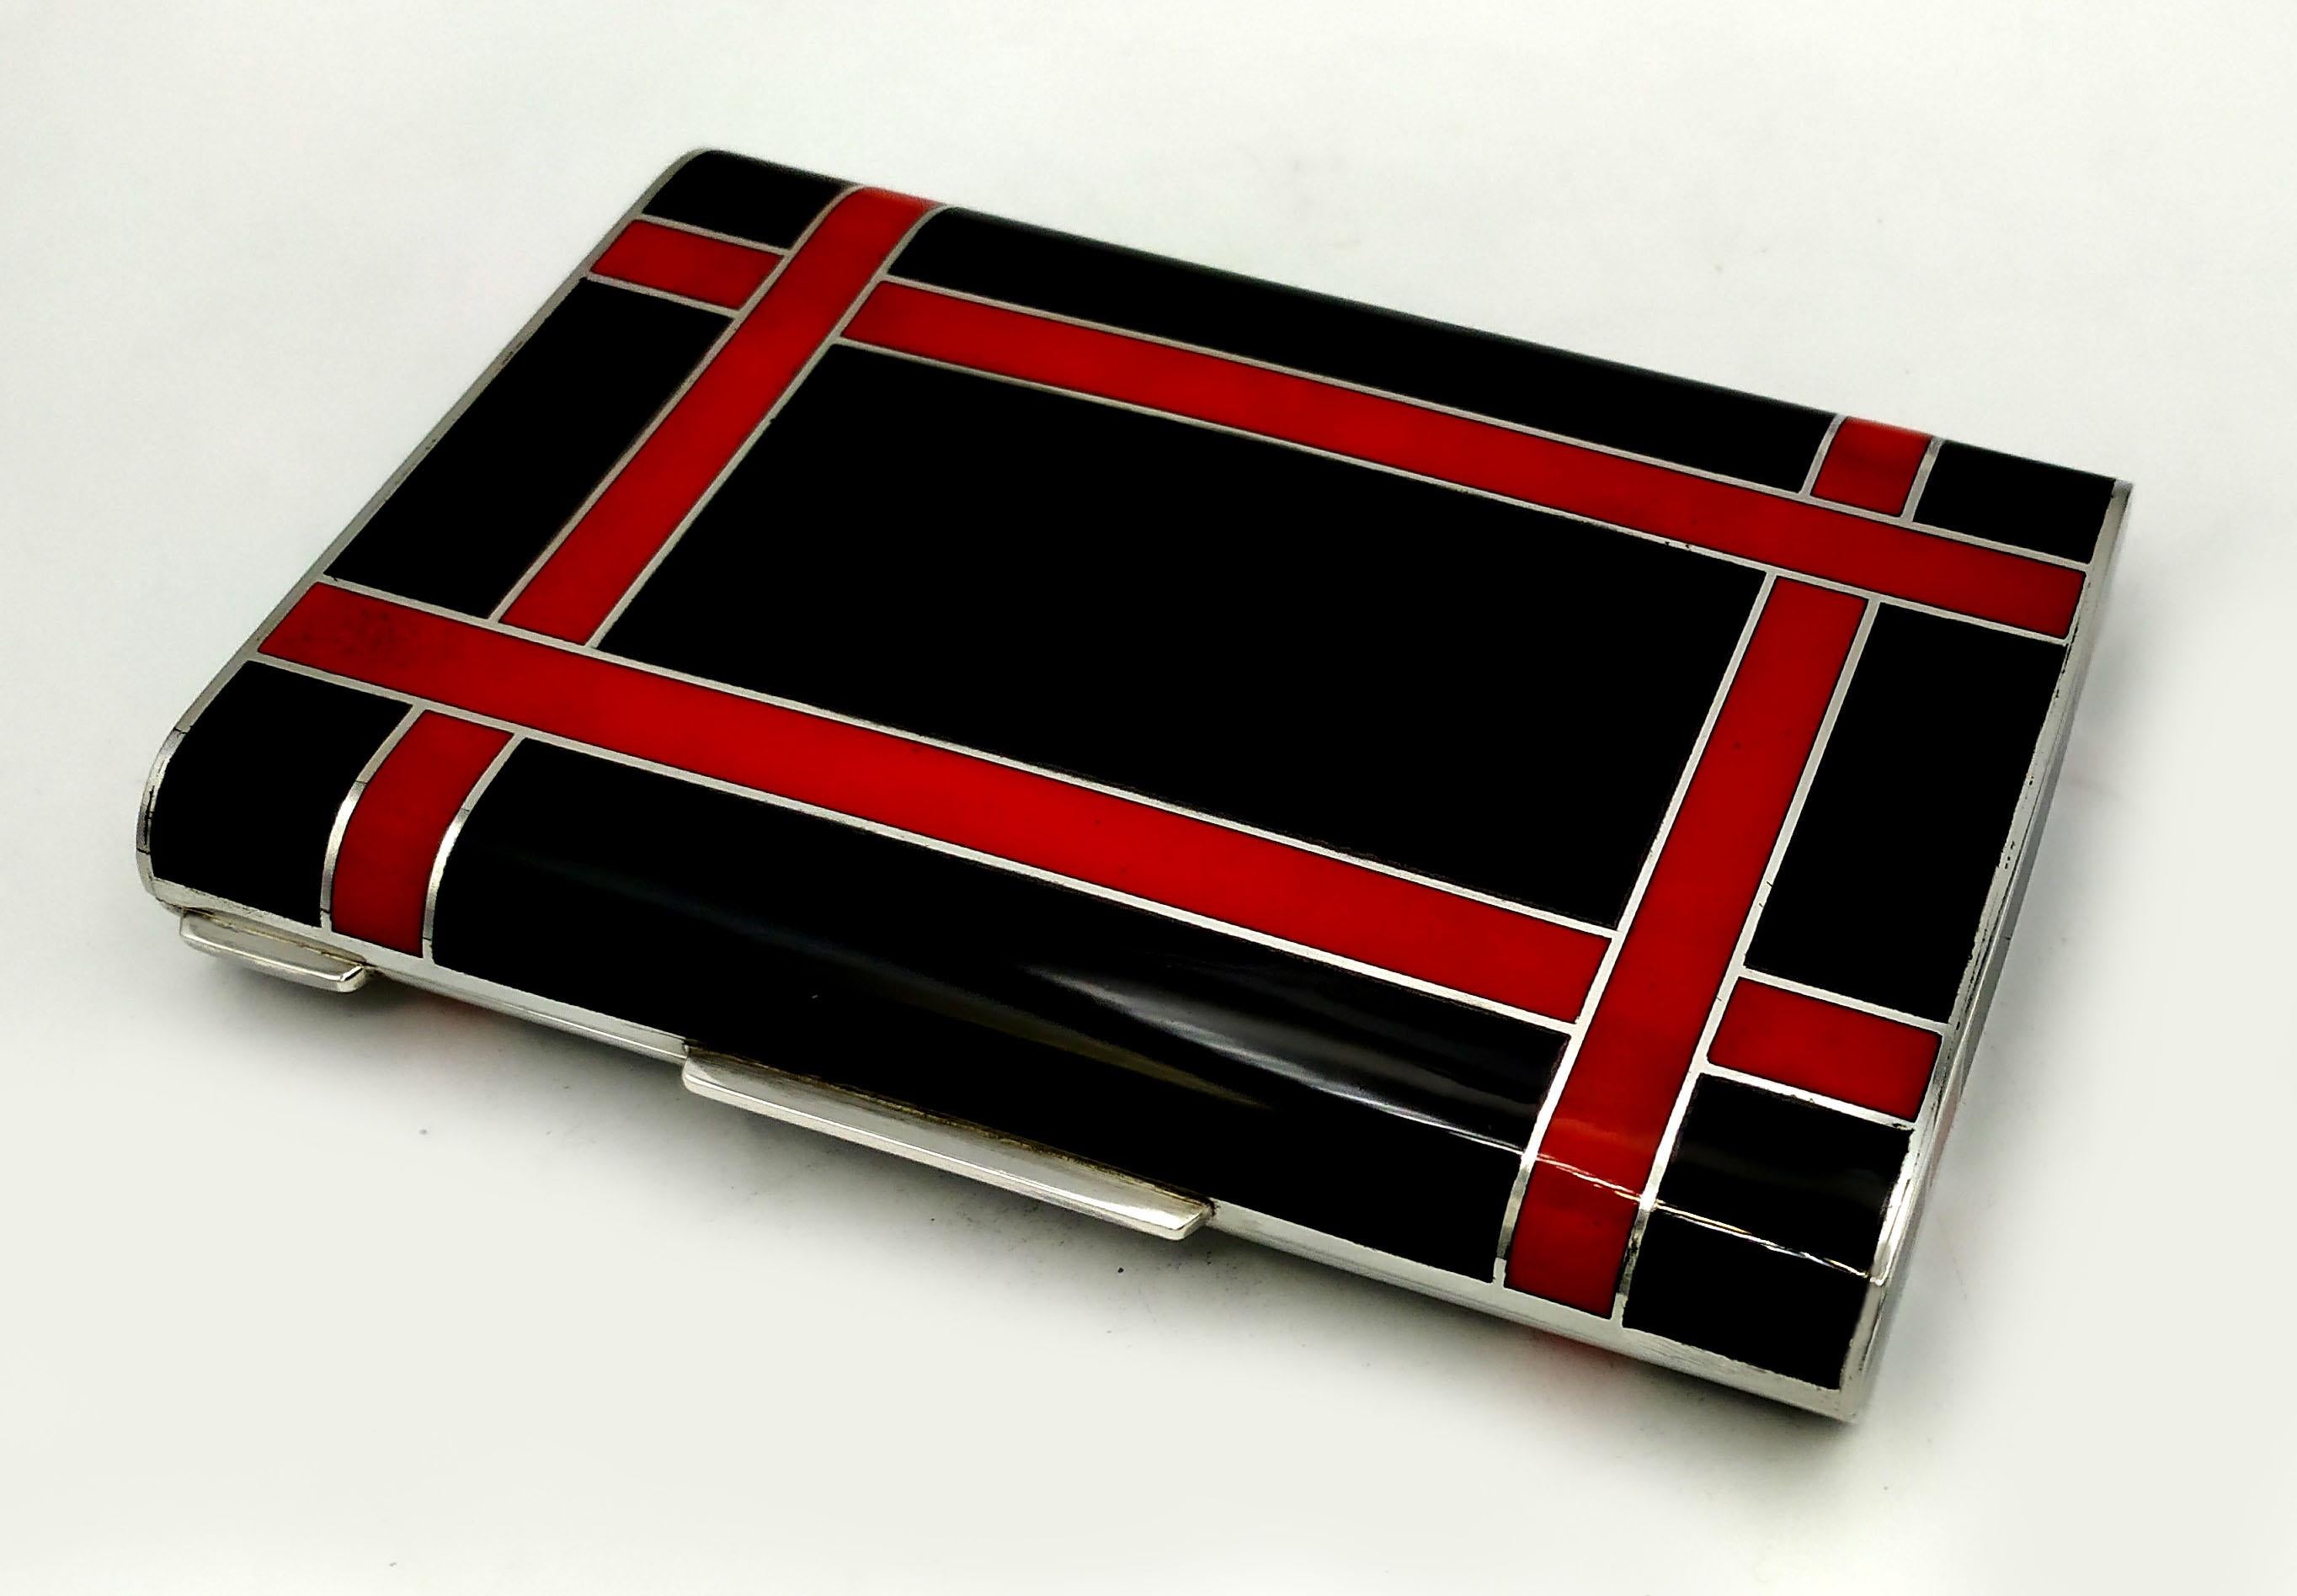 Box Black and Red enamel is Inspired by drawings by Louis Cartier from the early 1900s in Art Deco style and recreated for Cartier USA in the 1980s.
It is in 925/1000 sterling.
Box Black and Red has handpainted fired enamels geometric design.
Box